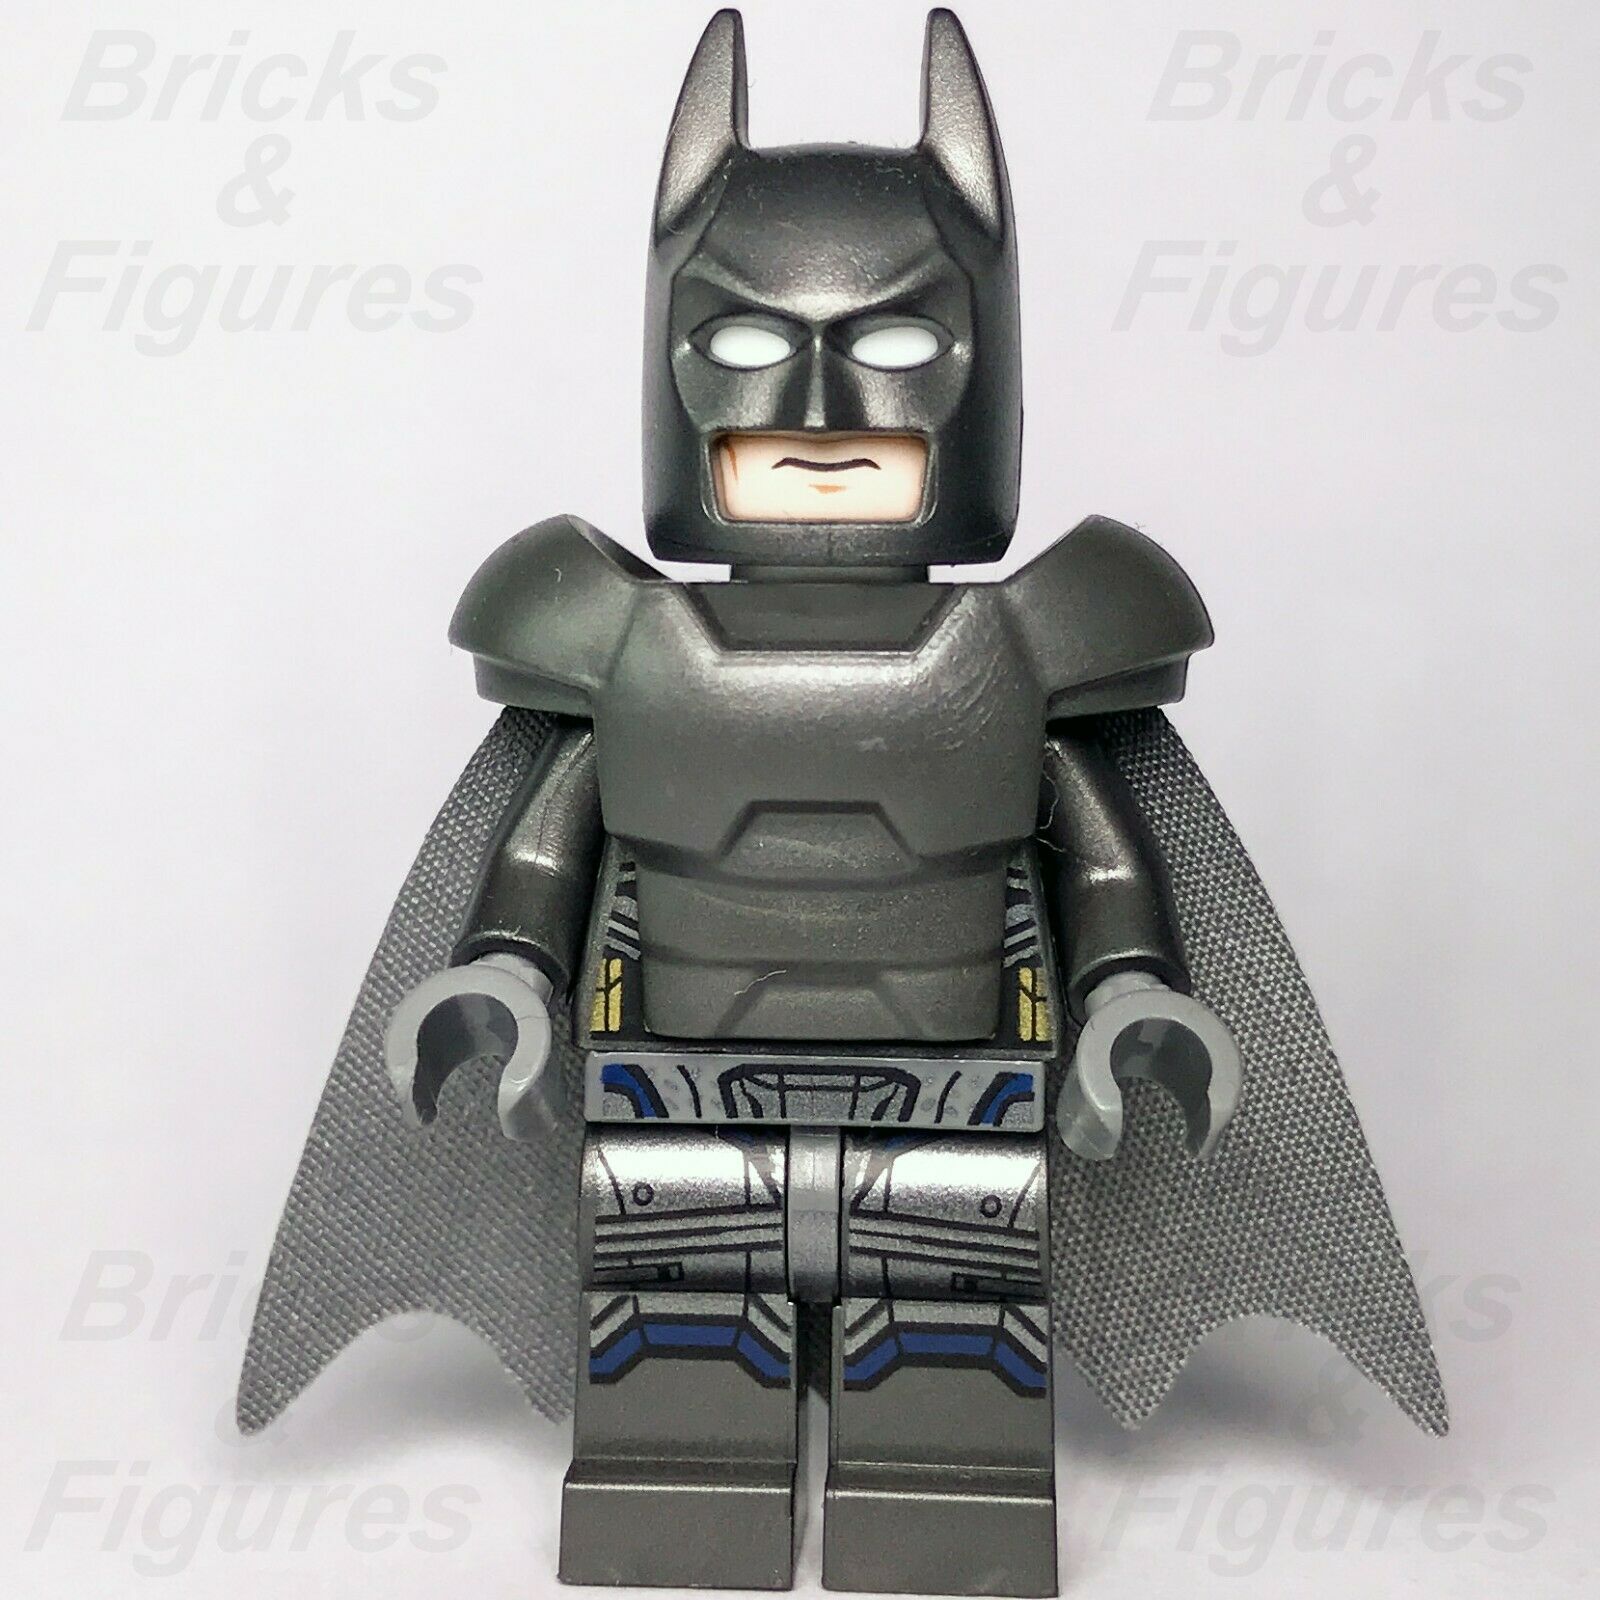 DC Super Heroes LEGO Batman Armored with Cape Dawn of Justice Minifigure 76044 - Bricks & Figures